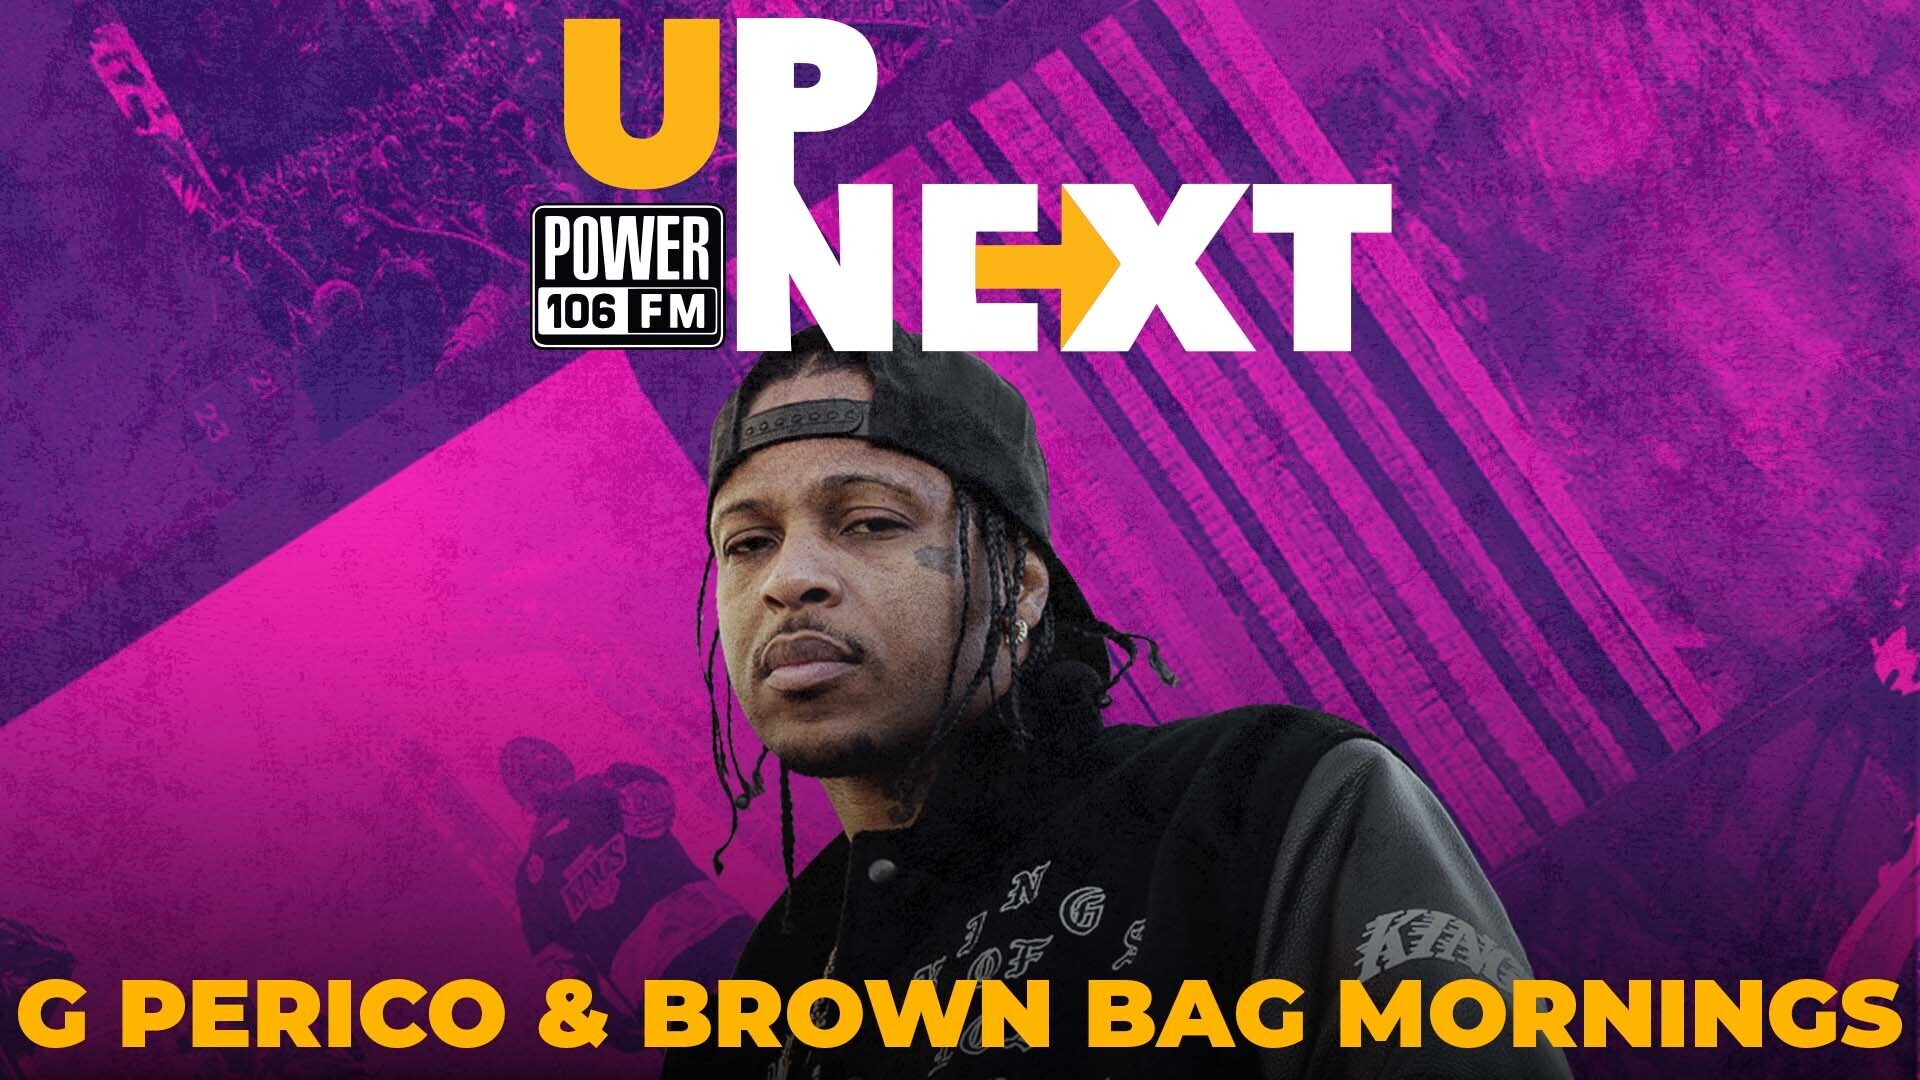 G Perico On Police Encounters, Being A West Coast Staple + Intimate “Up Next” Performance!